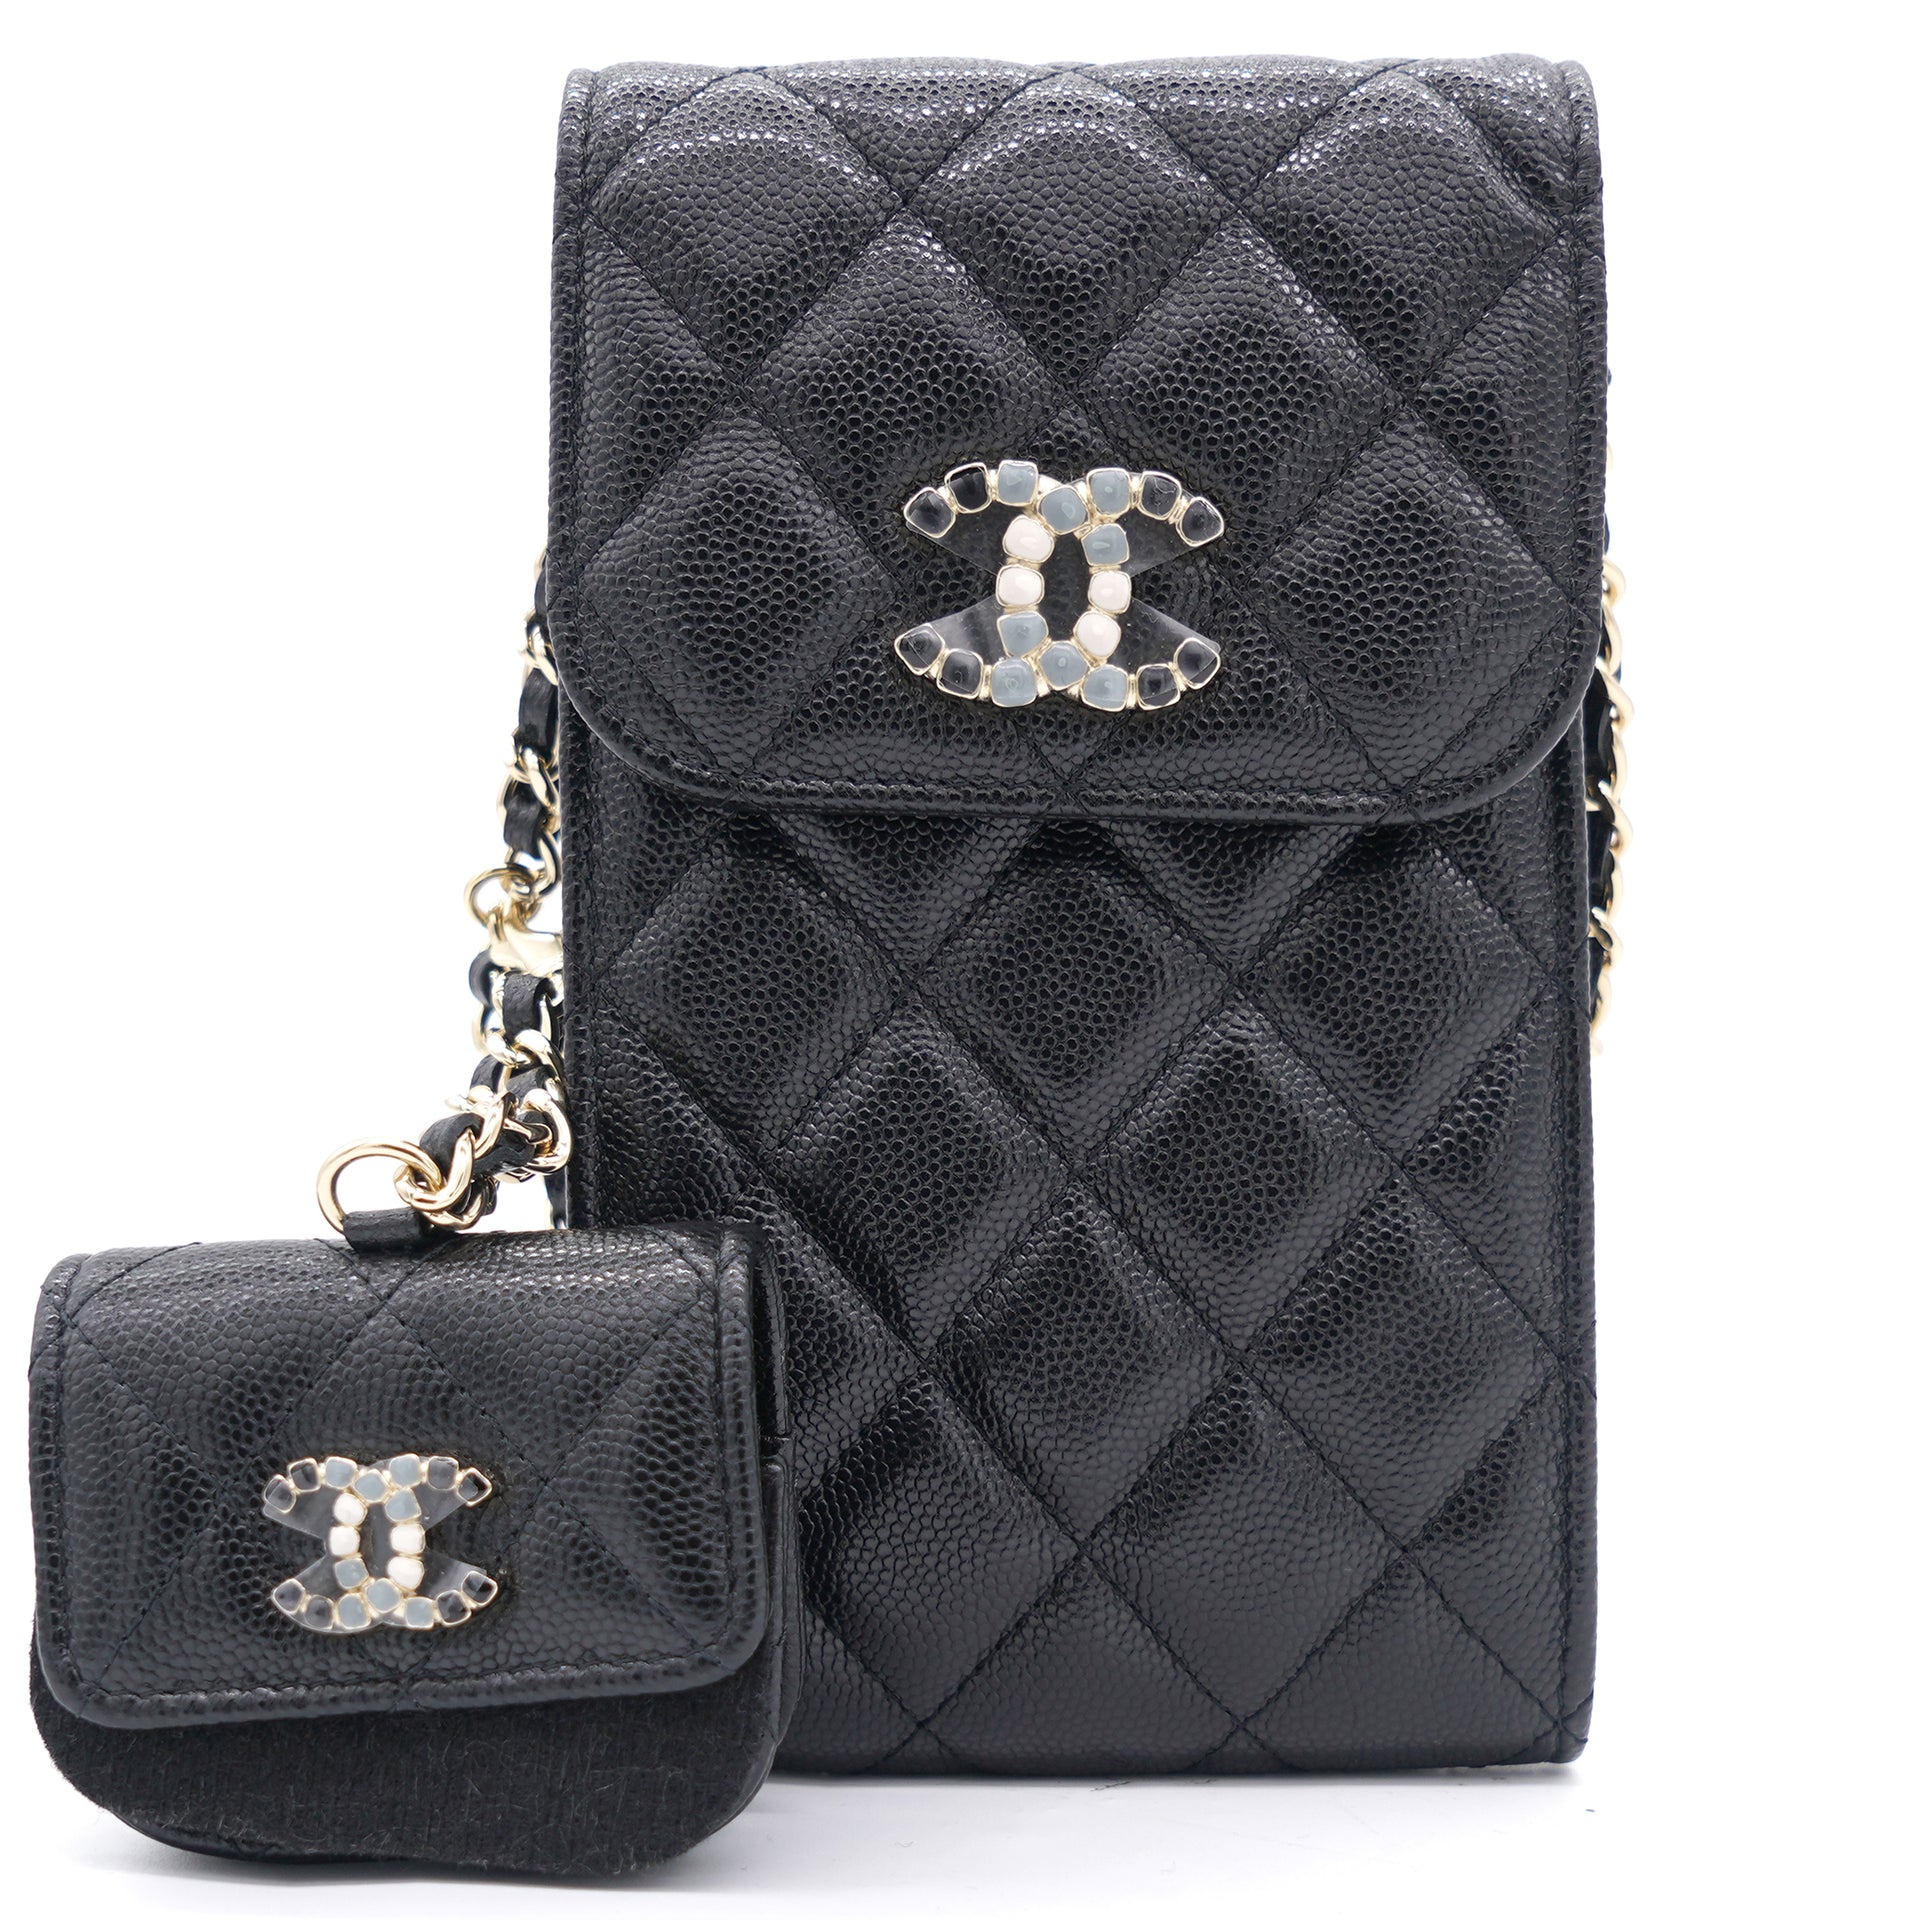 CHANEL Eyeglass Cases & Storage for sale